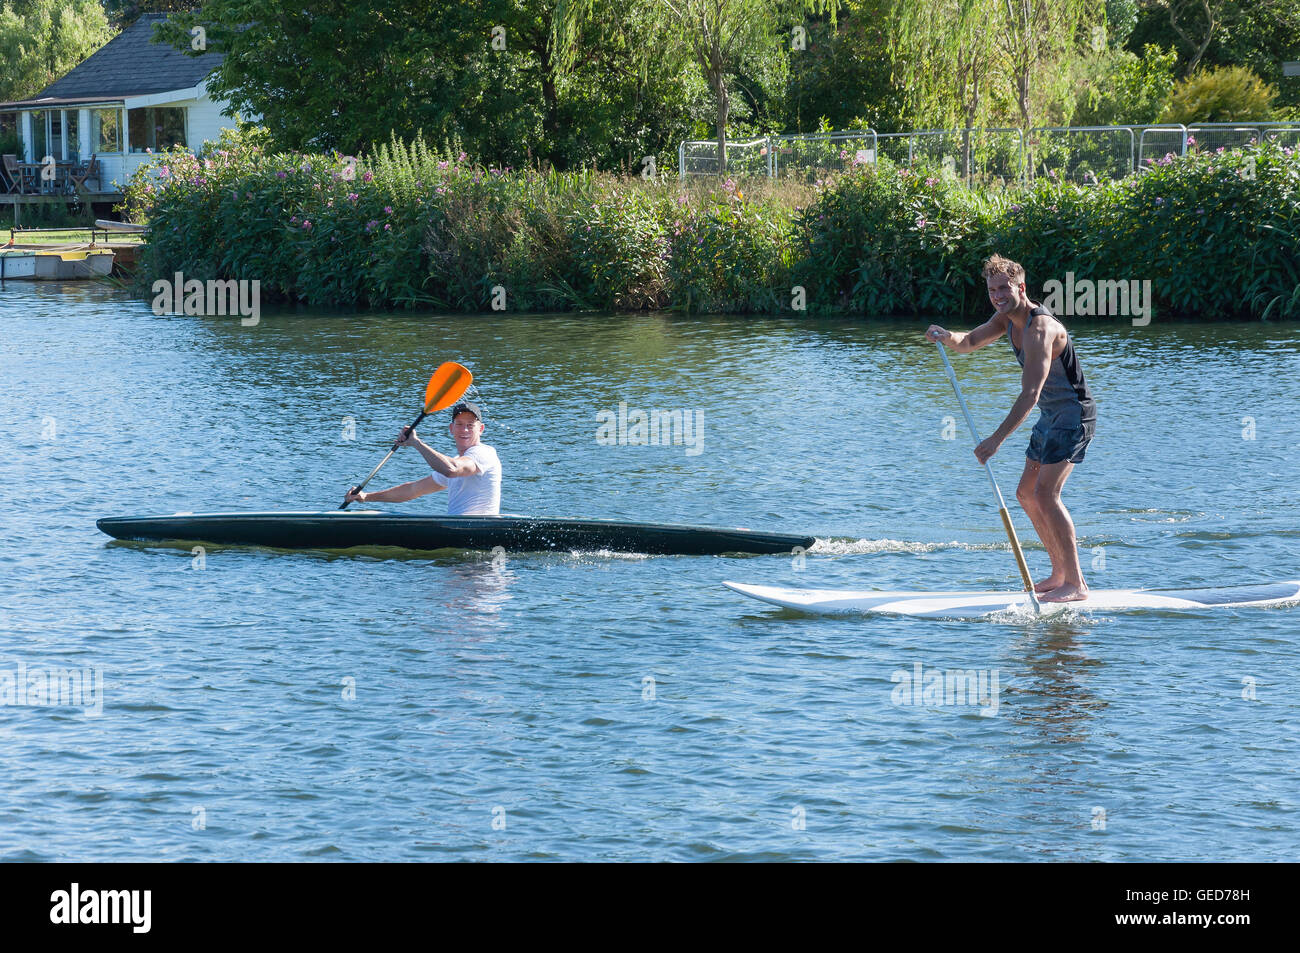 Men on Stand up paddle board and kayak on River Thames, Shepperton, Surrey, England, United Kingdom Stock Photo